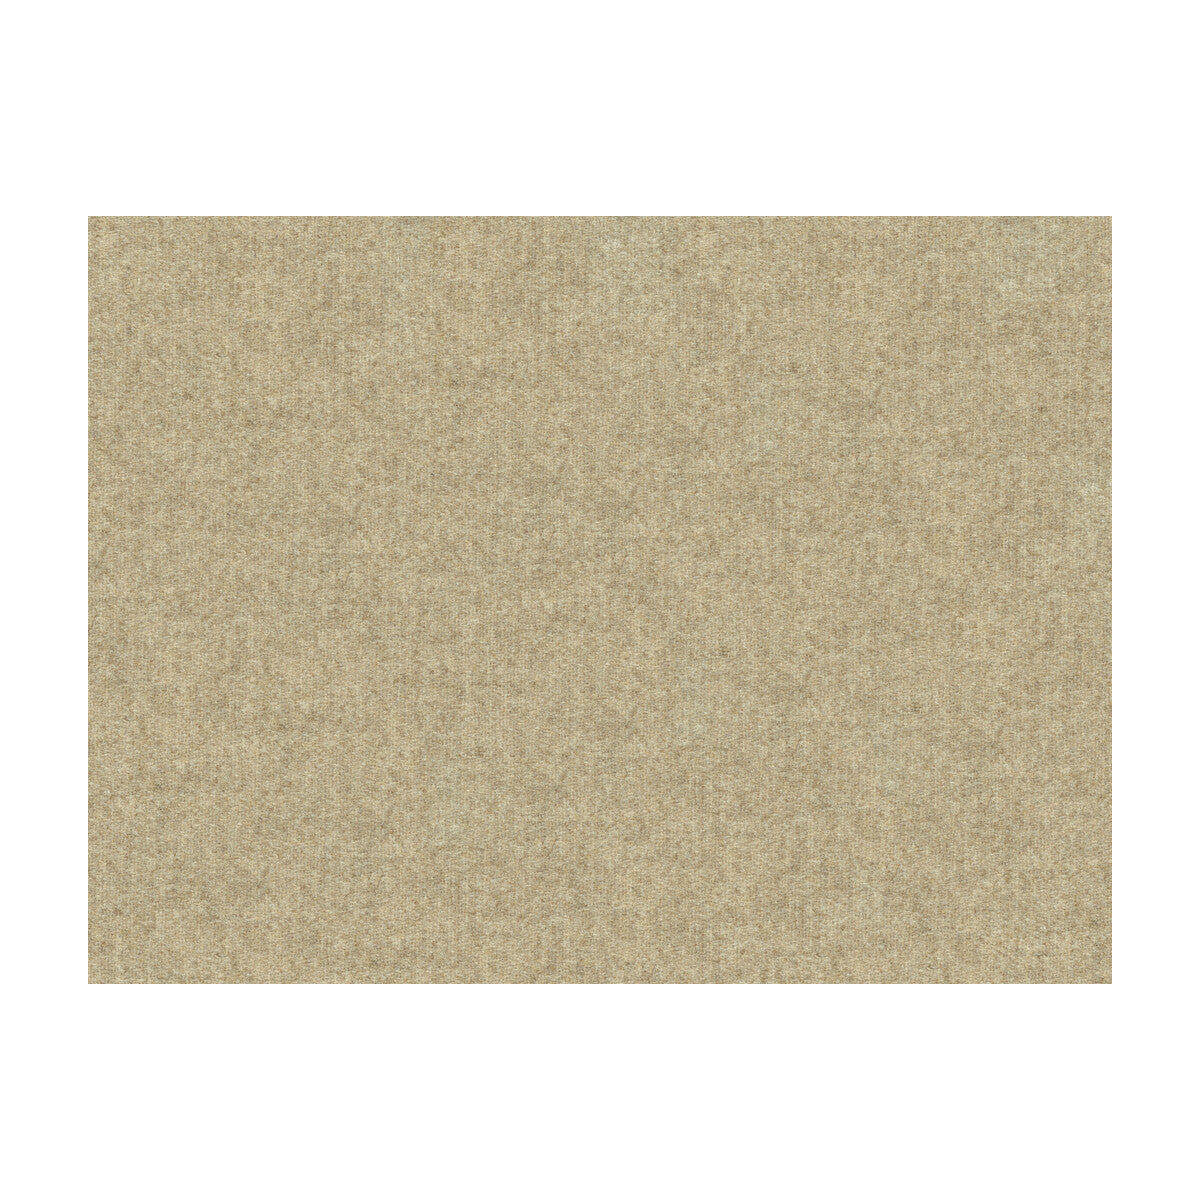 Chevalier Wool fabric in jute color - pattern 8013149.161.0 - by Brunschwig &amp; Fils